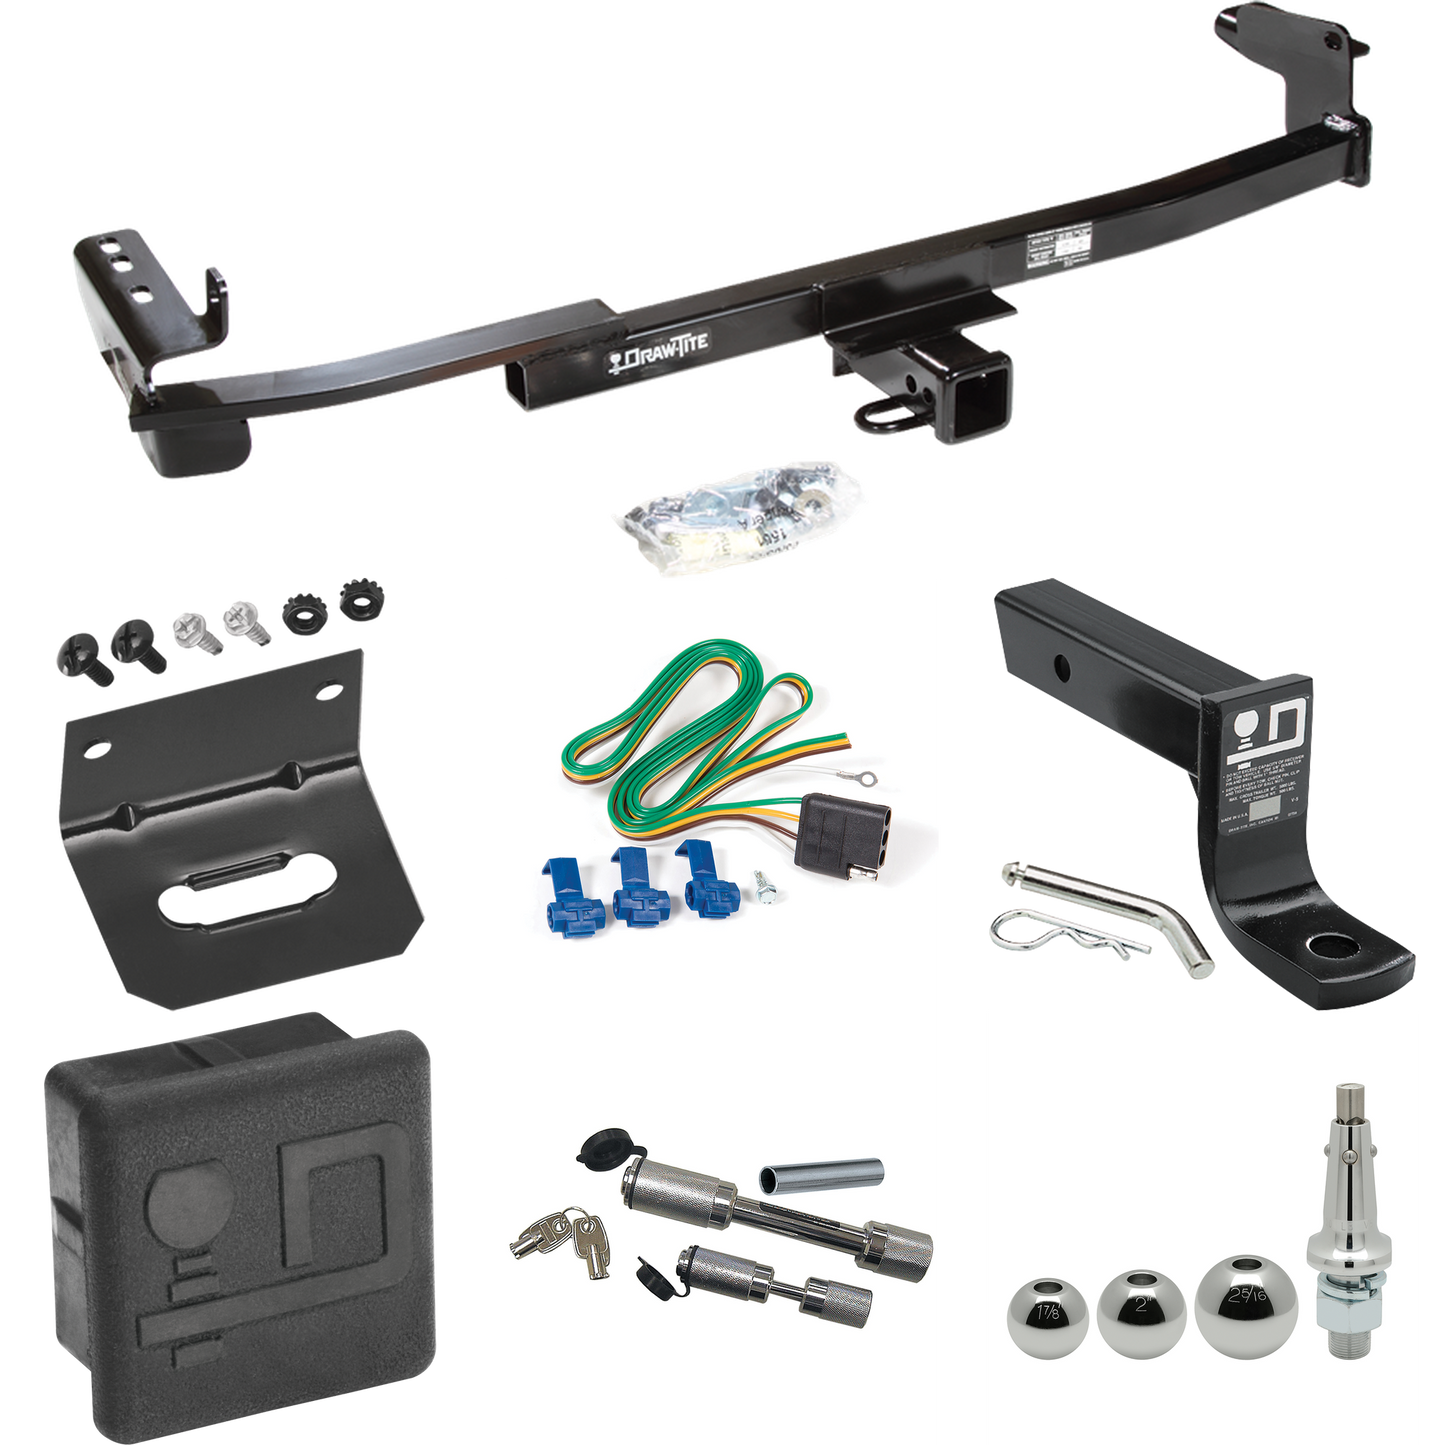 Fits 2008-2009 Ford Taurus Trailer Hitch Tow PKG w/ 4-Flat Wiring + Ball Mount w/ 4" Drop + Interchangeable Ball 1-7/8" & 2" & 2-5/16" + Wiring Bracket + Dual Hitch & Coupler Locks + Hitch Cover (For Sedan Models) By Draw-Tite